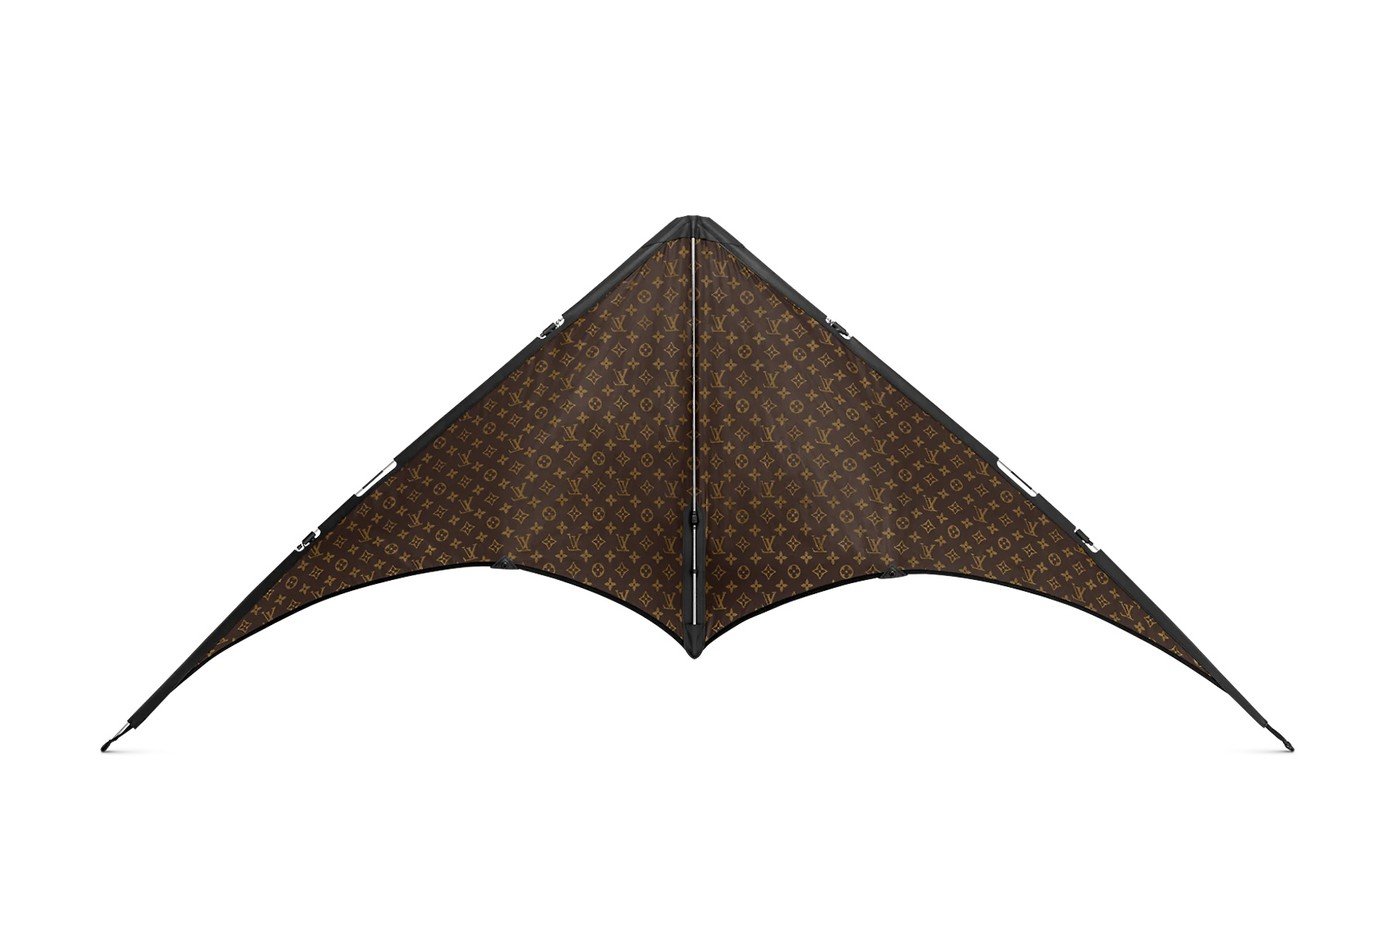 REVOLT on X: Louis Vuitton airplane shaped bag cost $39,000 &